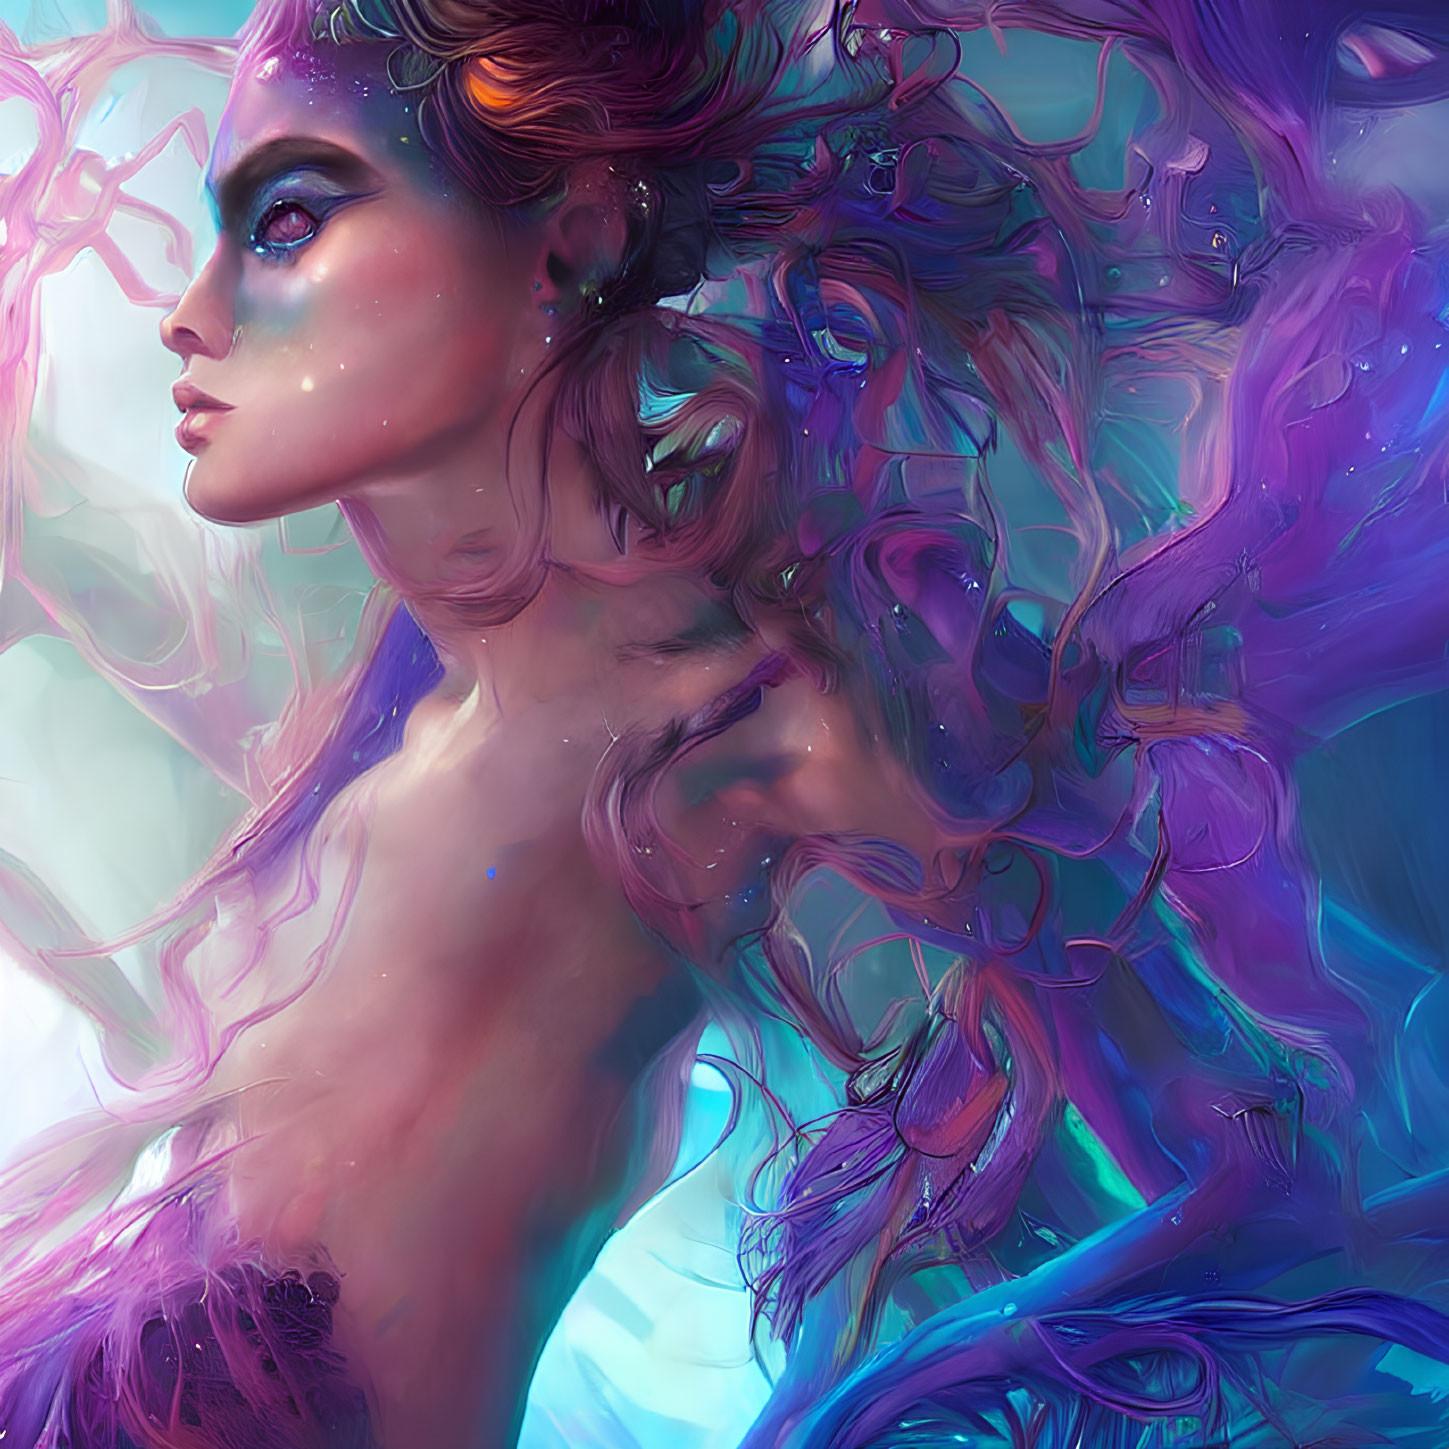 Colorful digital artwork: Woman with flowing hair and striking makeup in purple, blue, and pink.